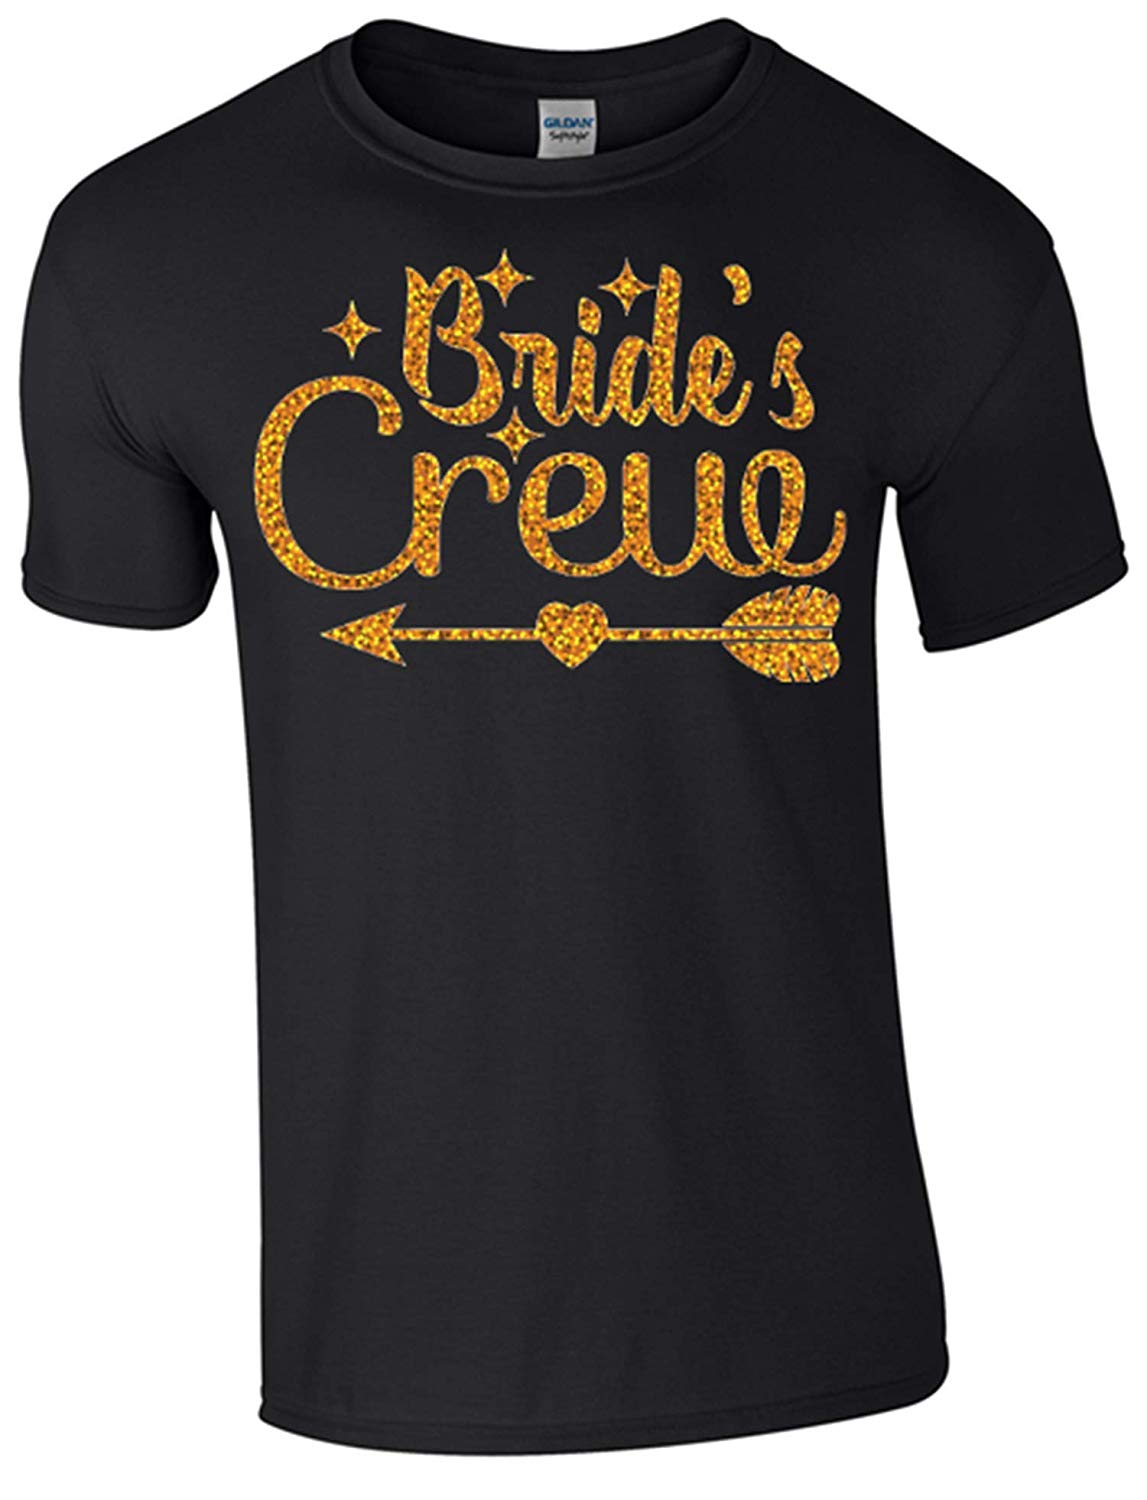 Army 1157 Kit Hen Party Bride and Bride Crewe T-Shirts - Army 1157 kit Crewe Black / L Army 1157 Kit Veterans Owned Business